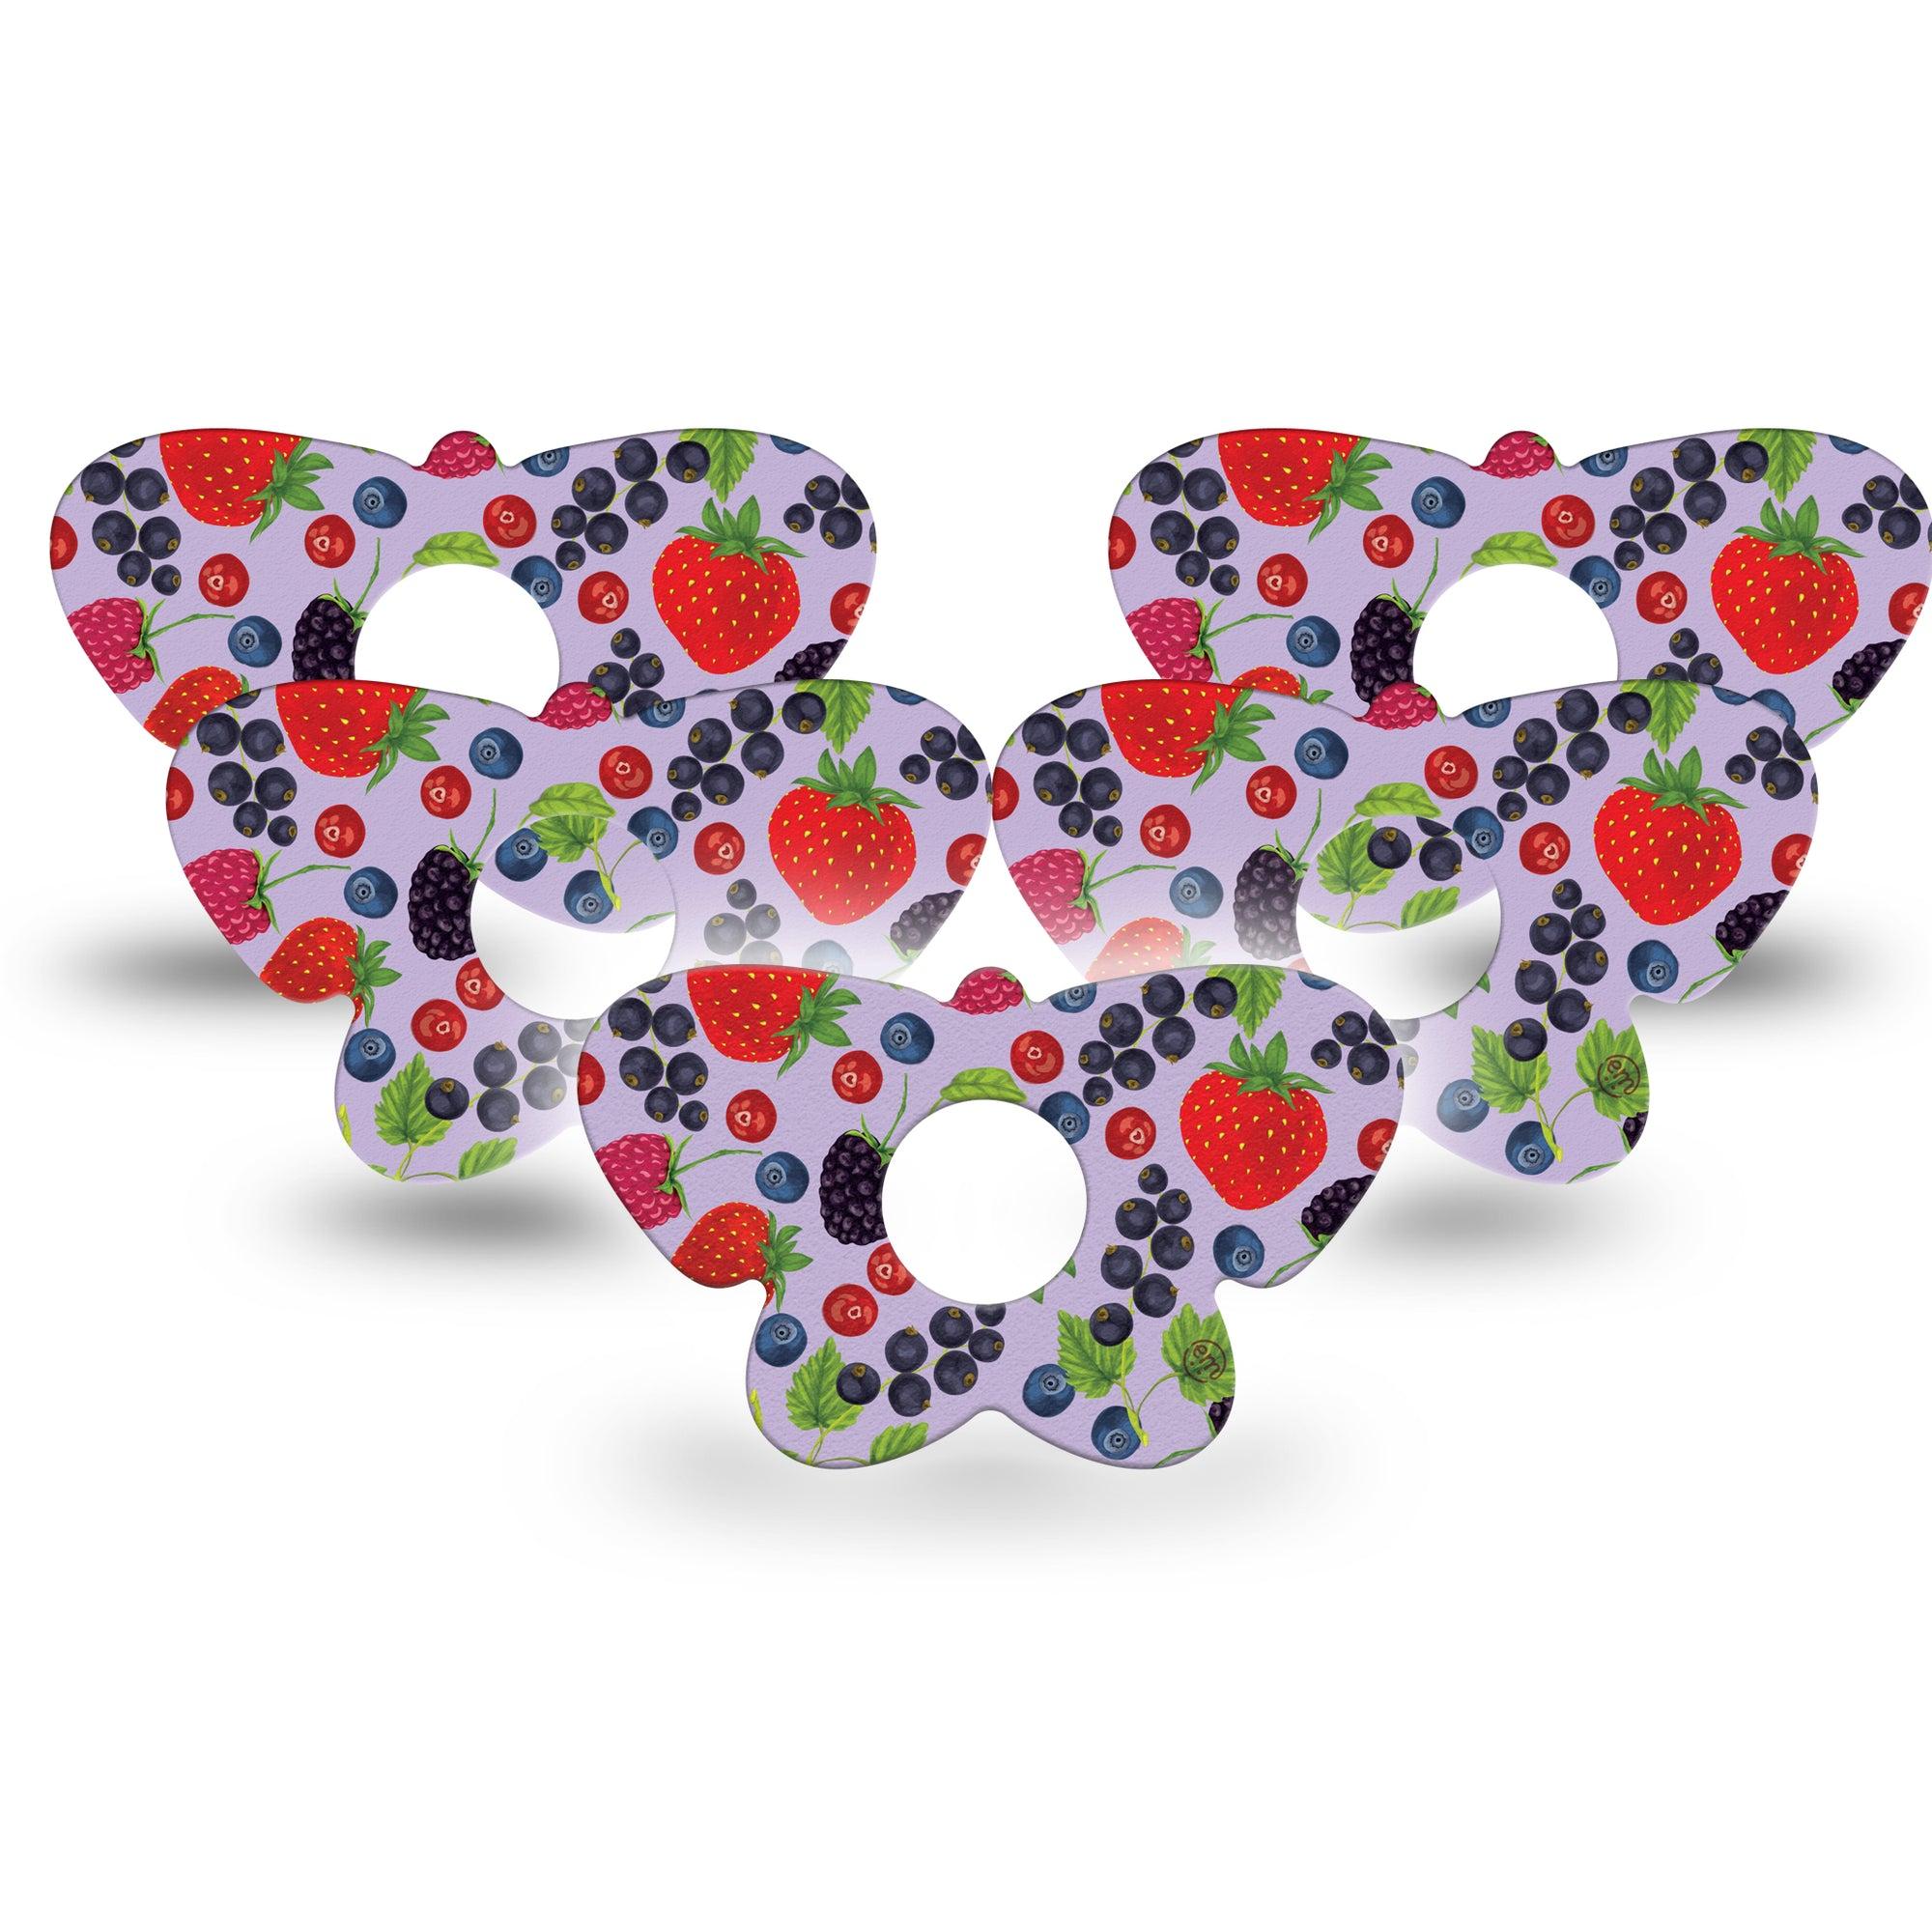 ExpressionMed Wild Berries Butterfly Libre 3 Tape, 5-Pack, Tooty Fruity Themed, CGM Overlay Patch Design